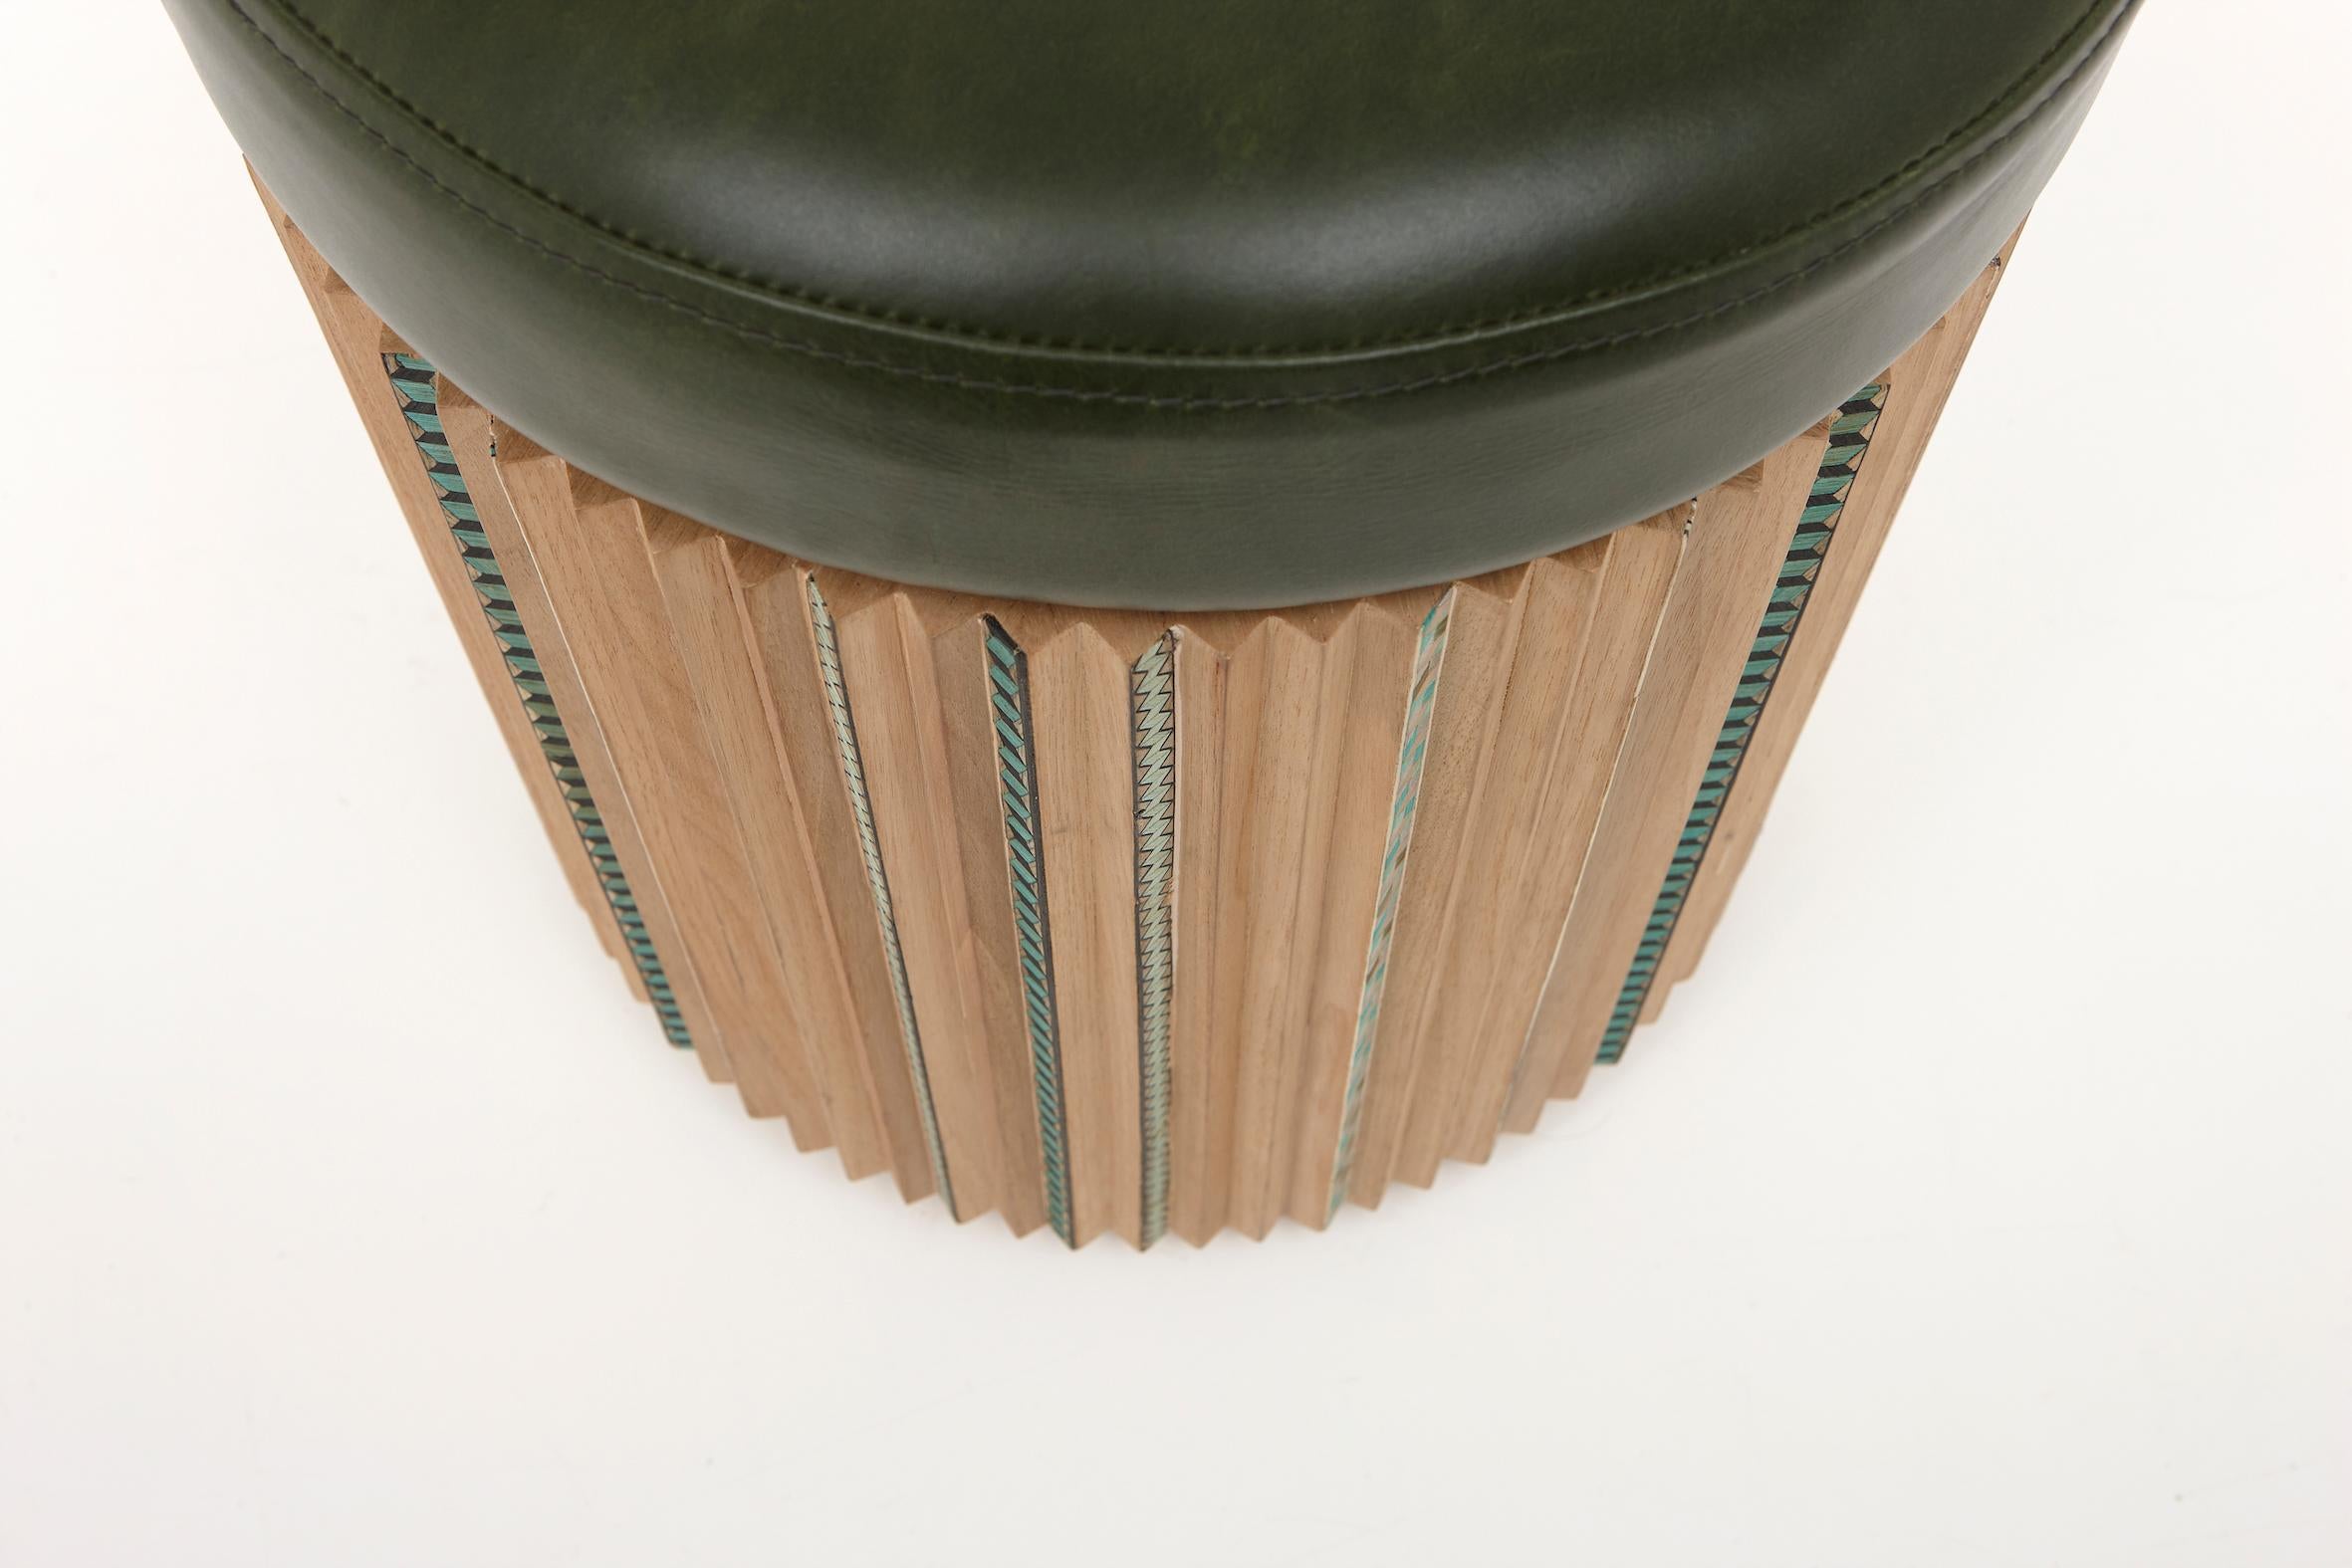 The stool in leather swivels above a pleated wood base.